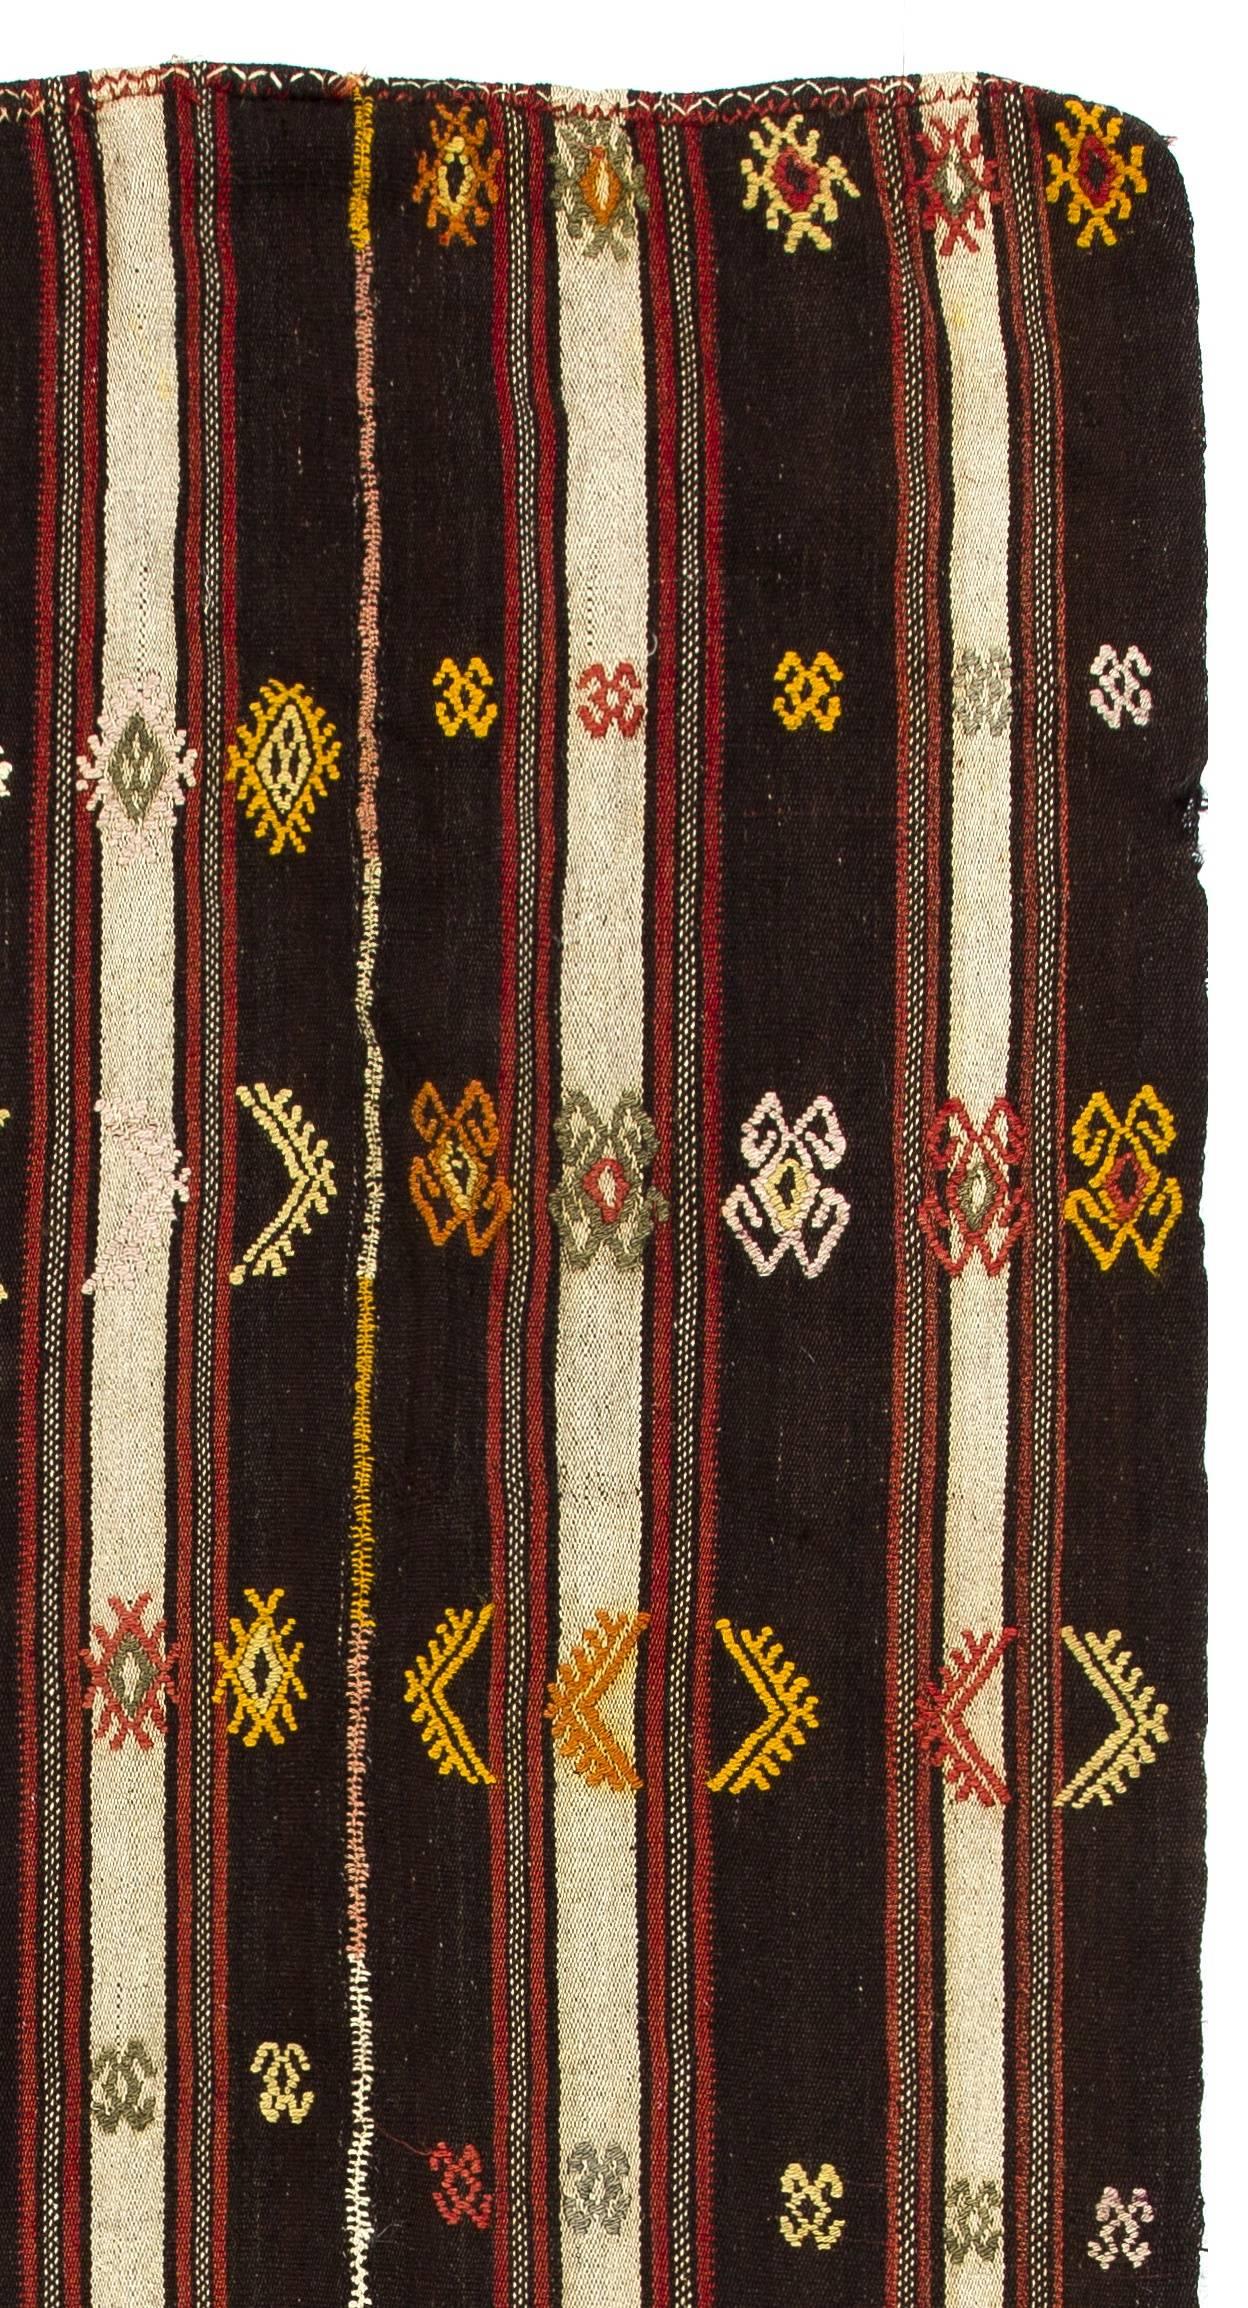 This authentic multifunctional handwoven flat-weave Kilim from Central Turkey was made in mid-20th century by Nomads to be used as a floor covering, bed/bedding cover and a curtain to divide their goat hair tents into two compartments. Measures: 5.5